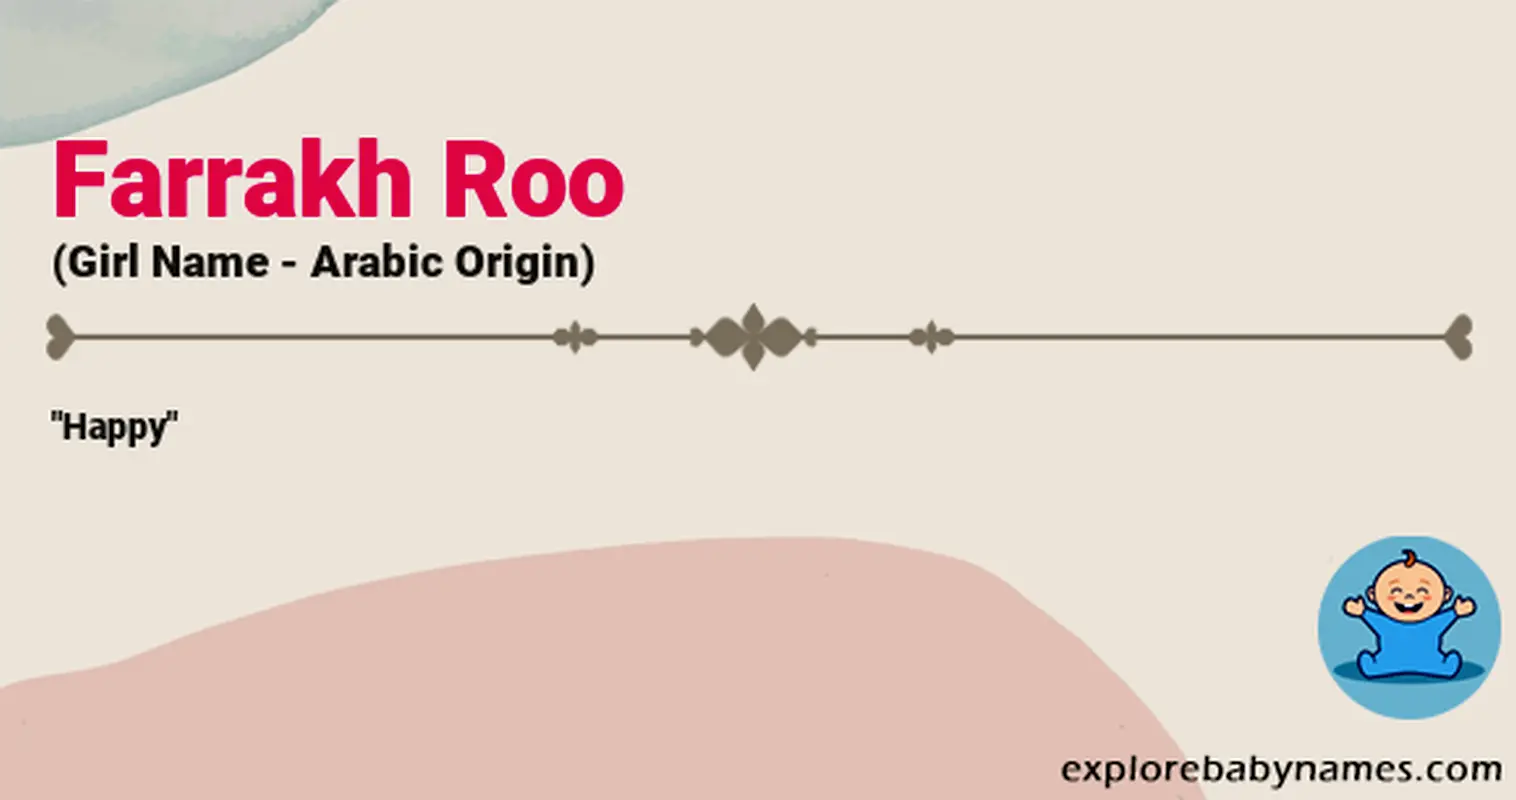 Meaning of Farrakh Roo